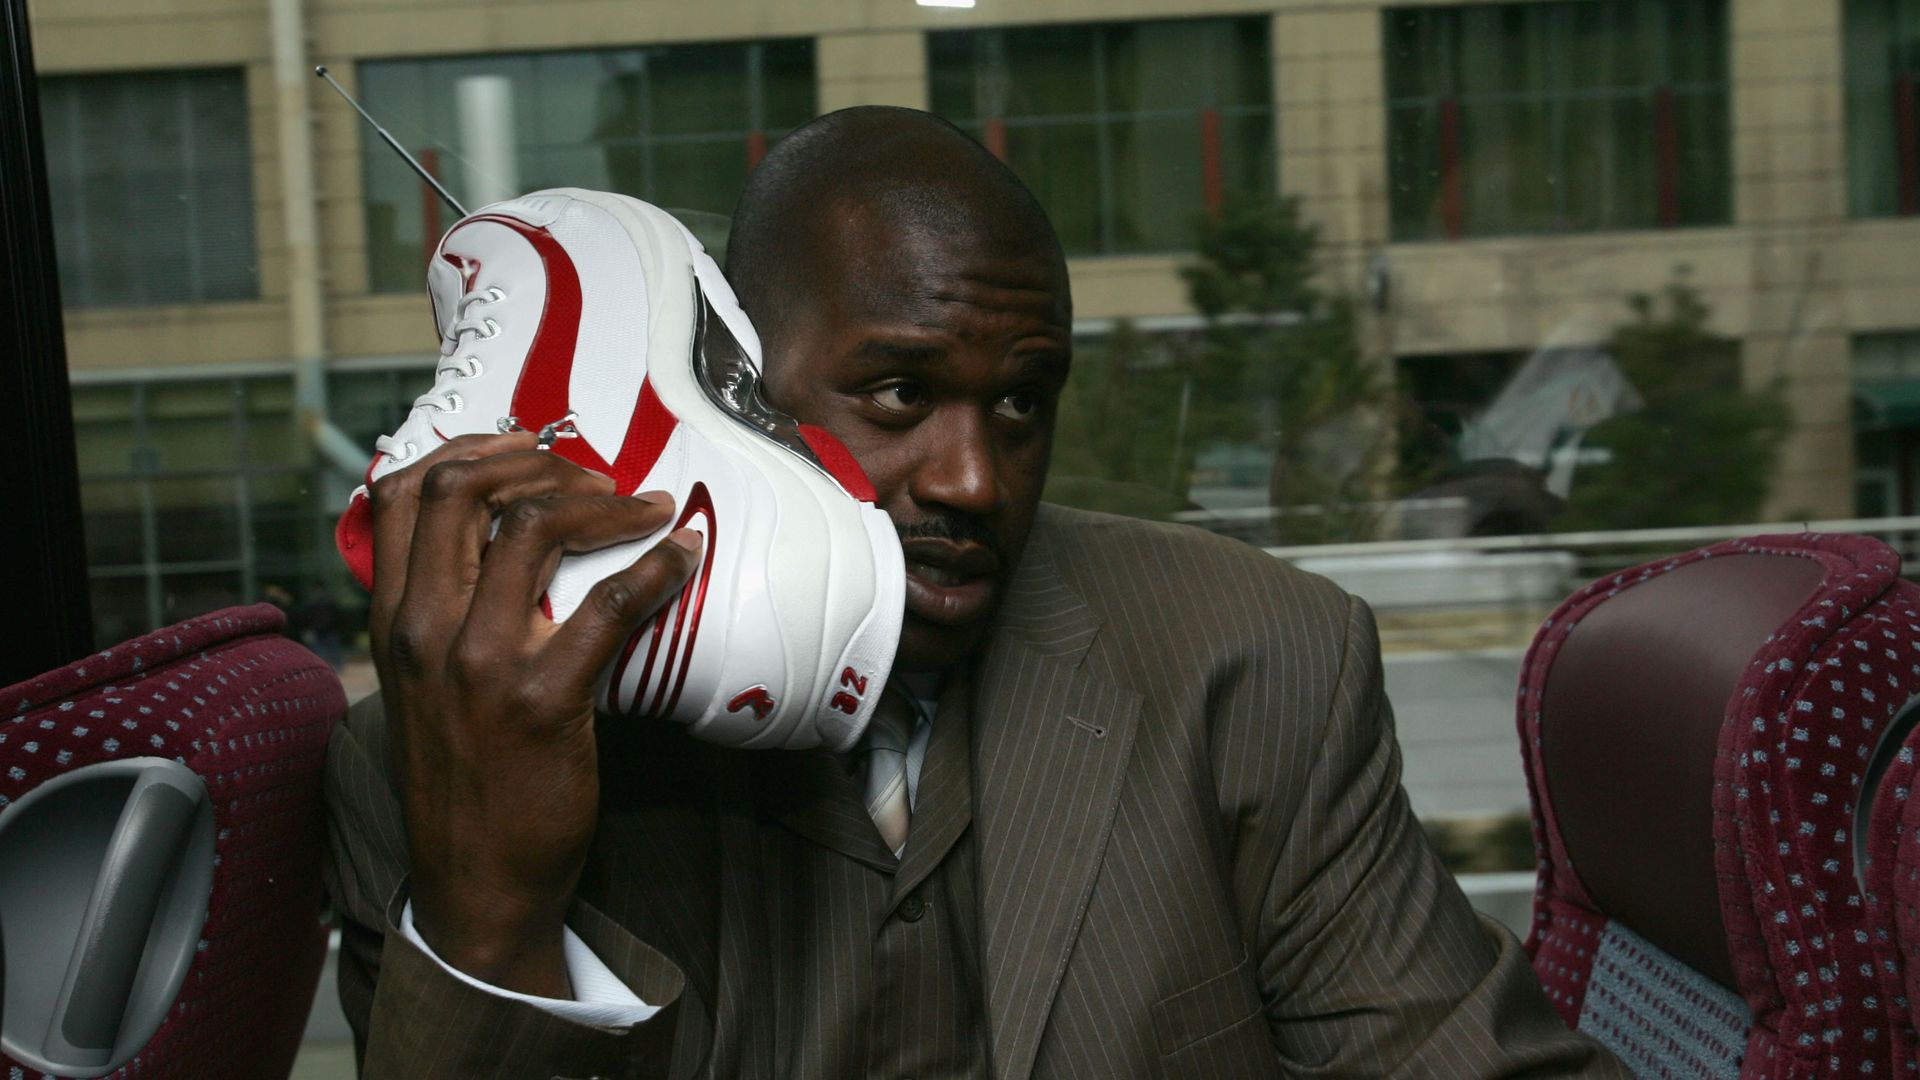 Shaquille O'Neal of the Eastern Conference All-Stars talks on his sneaker phone as he rides the bus to the Arena for the 54th All-Star Game